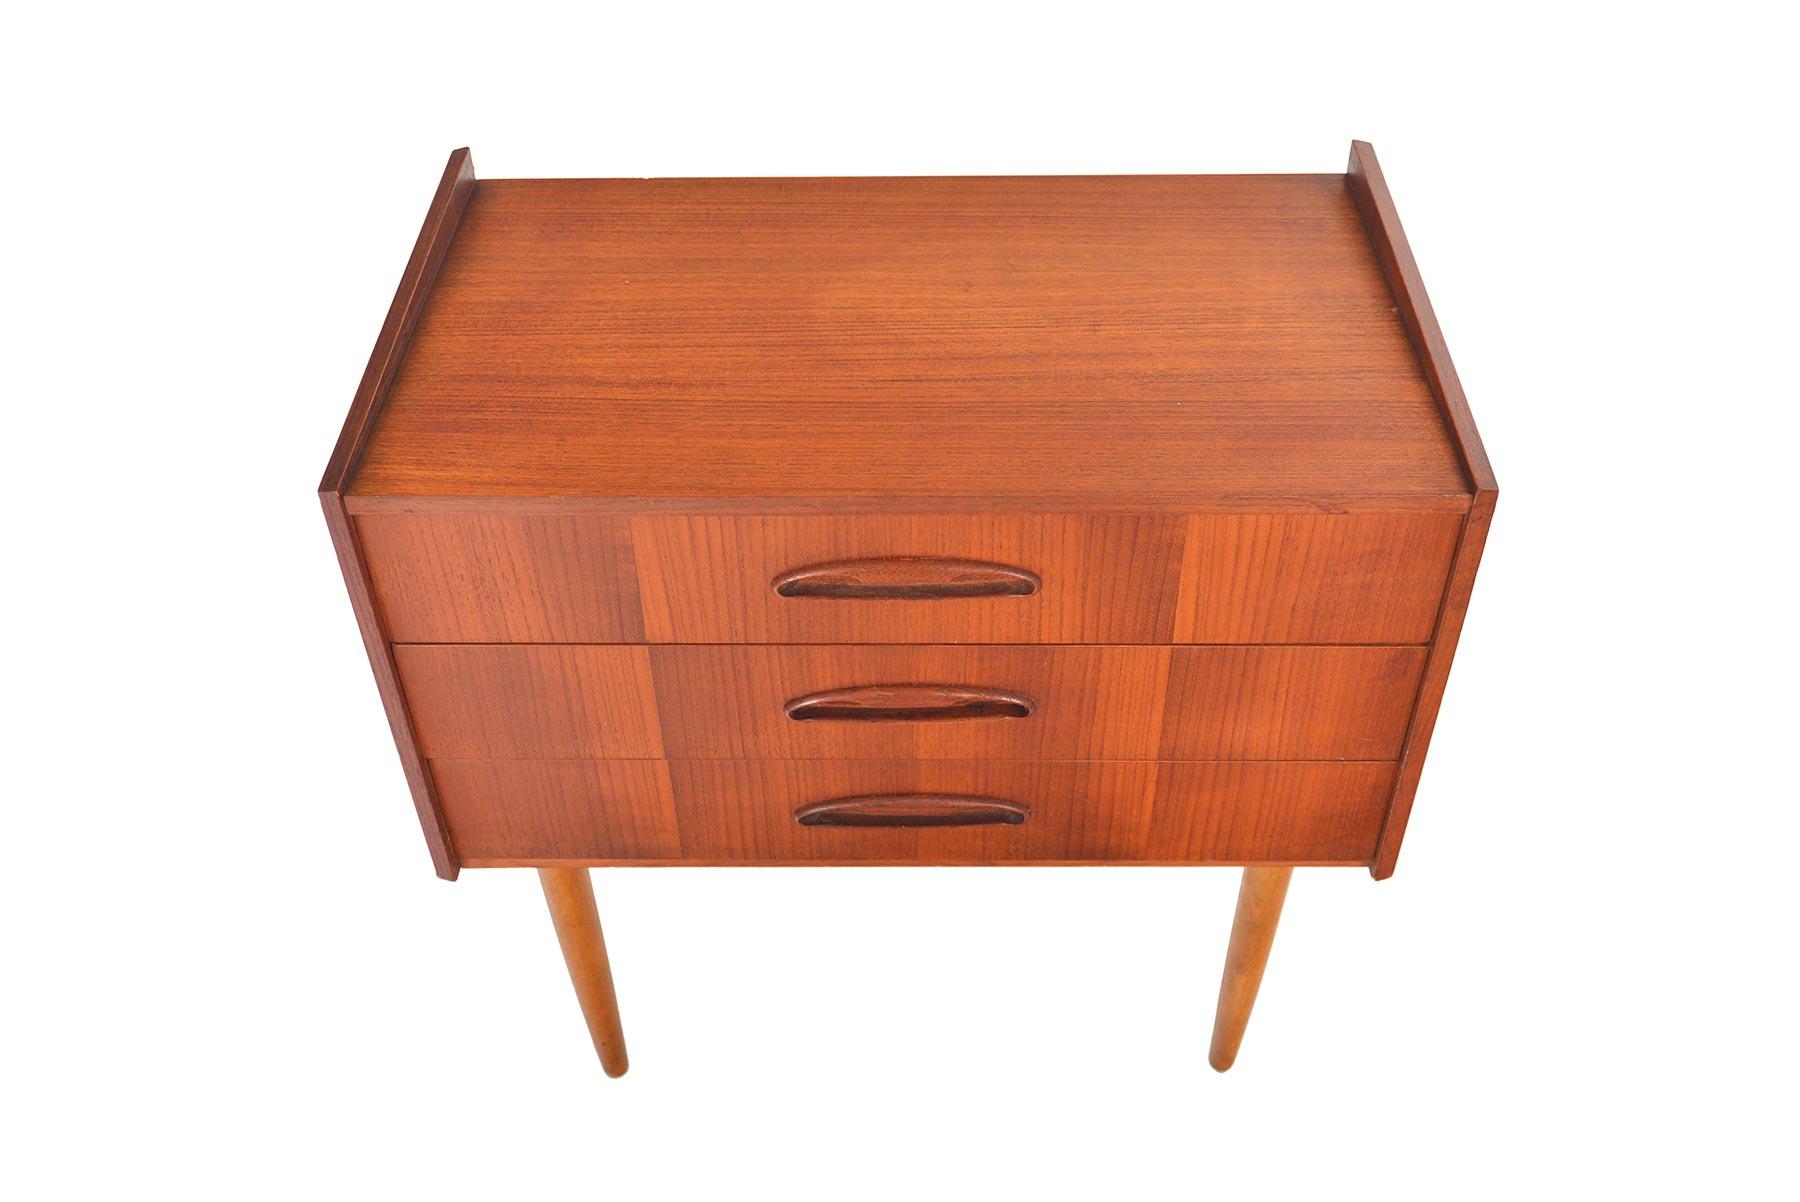 This Danish modern midcentury three drawer chest in teak features gorgeous carved full atomic pulls. Perfect for use in an entry way or as a single nightstand, this piece offers exceptional storage! In excellent original condition with typical wear